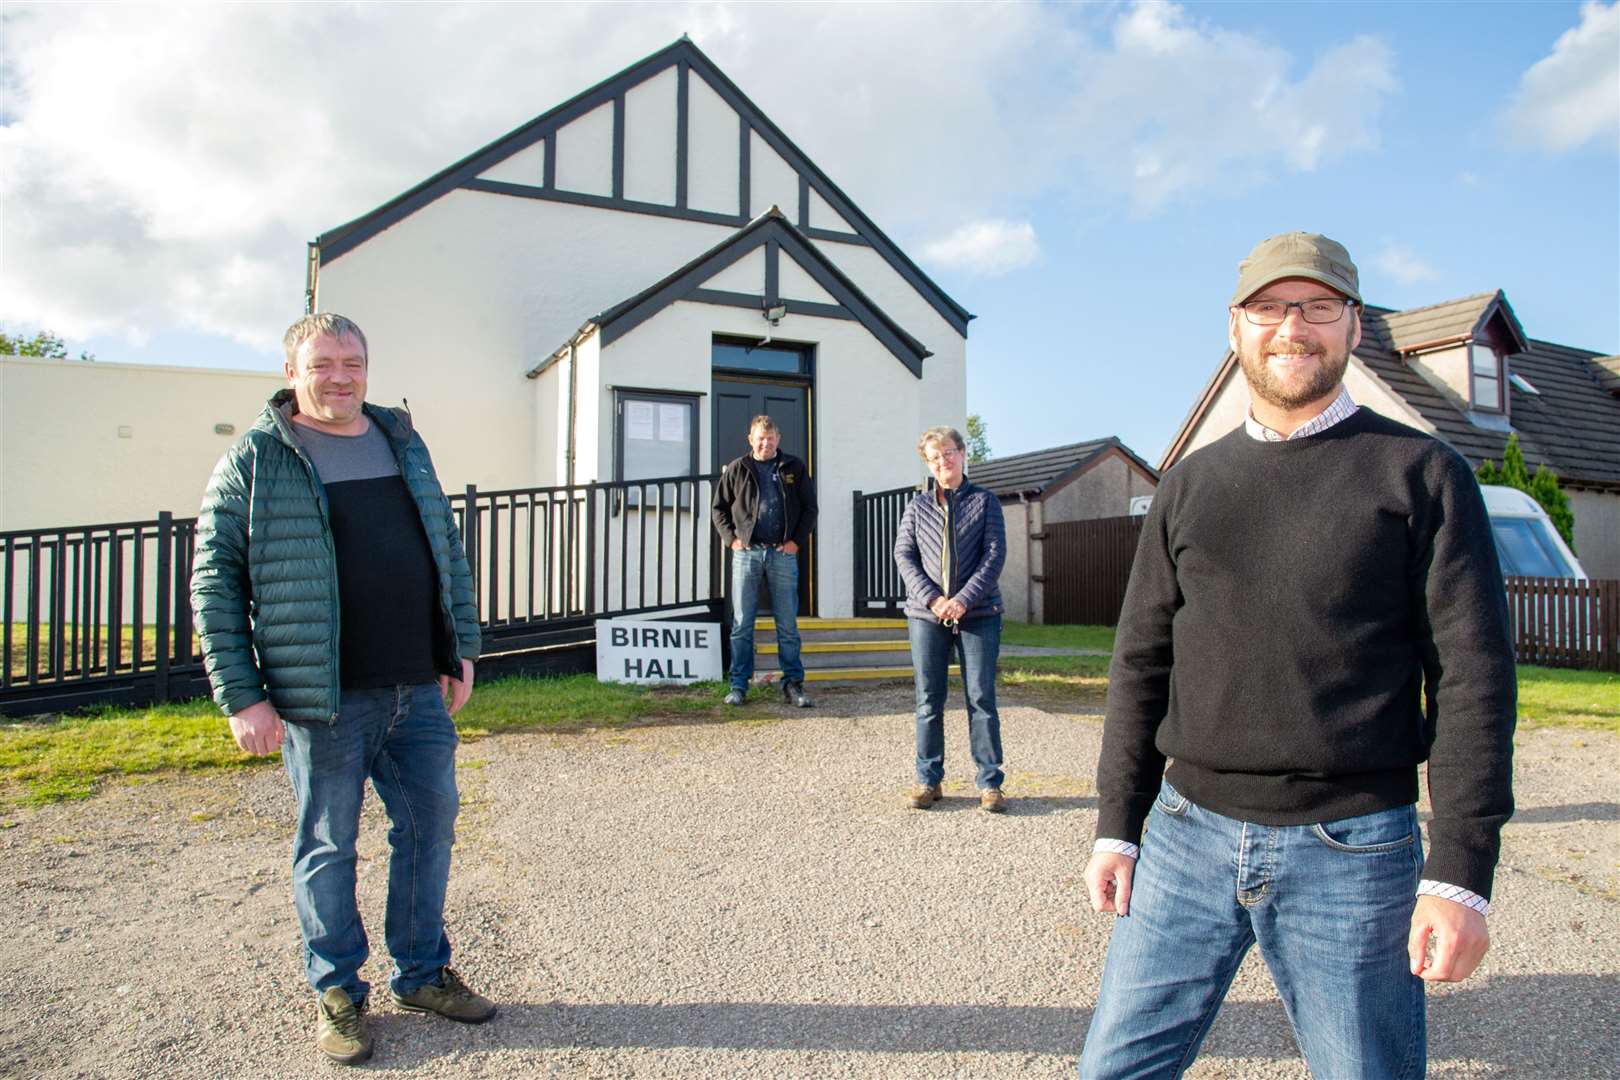 Left to Right: Cammy Milne (painter), Kenny Green (painter), Jill Geach (volunteer), Kenny Morran (chairman Birnie Hall). The Birnie Hall was granted £10,000 to upgrade the outside of the hall. The Bell Group (Painters) are providing paint and painting everything free of charge. Picture: Daniel Forsyth